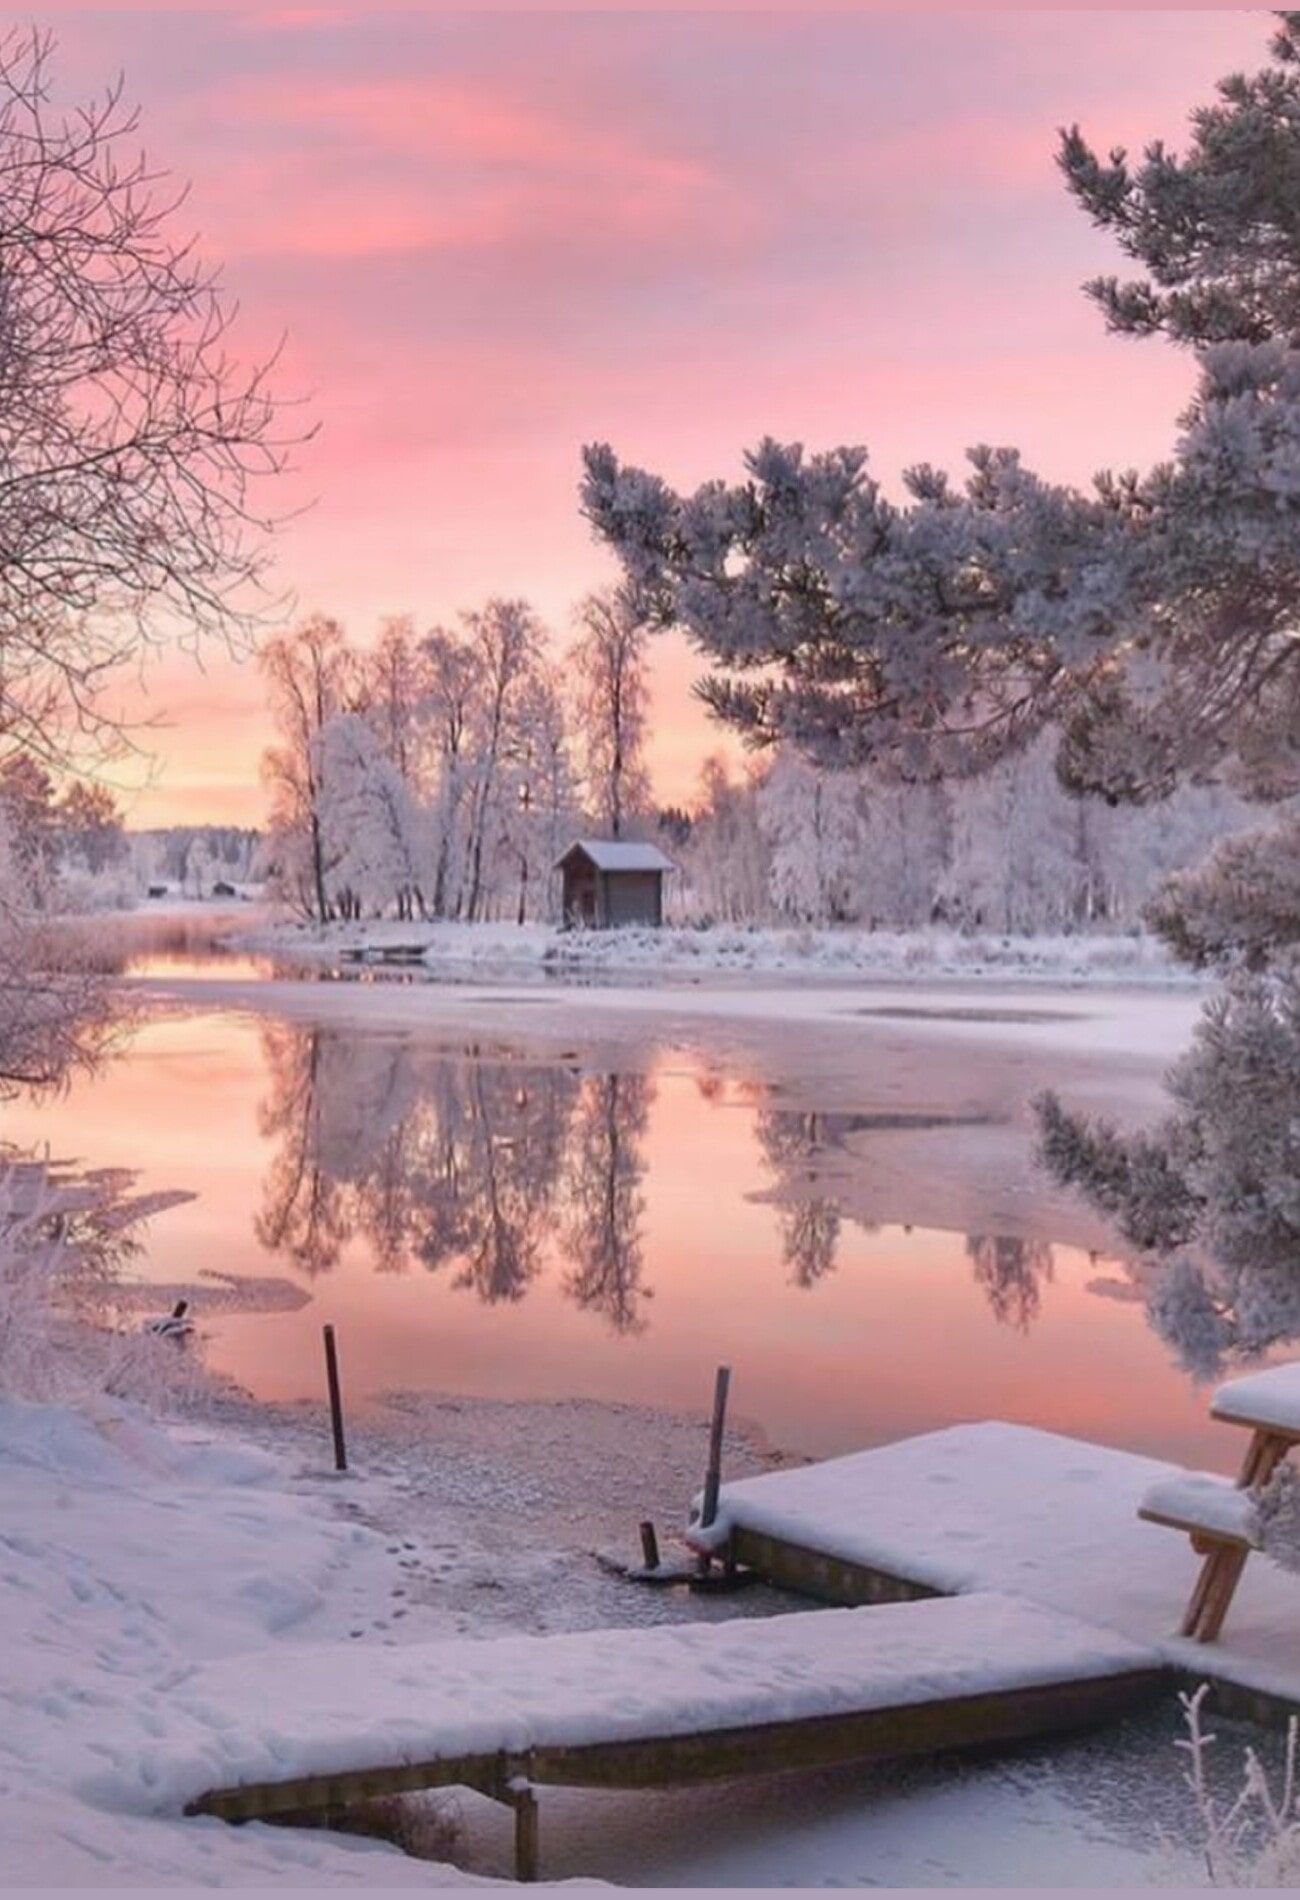 Pink Aesthetic Snow Landscape Wallpapers - Wallpaper Cave